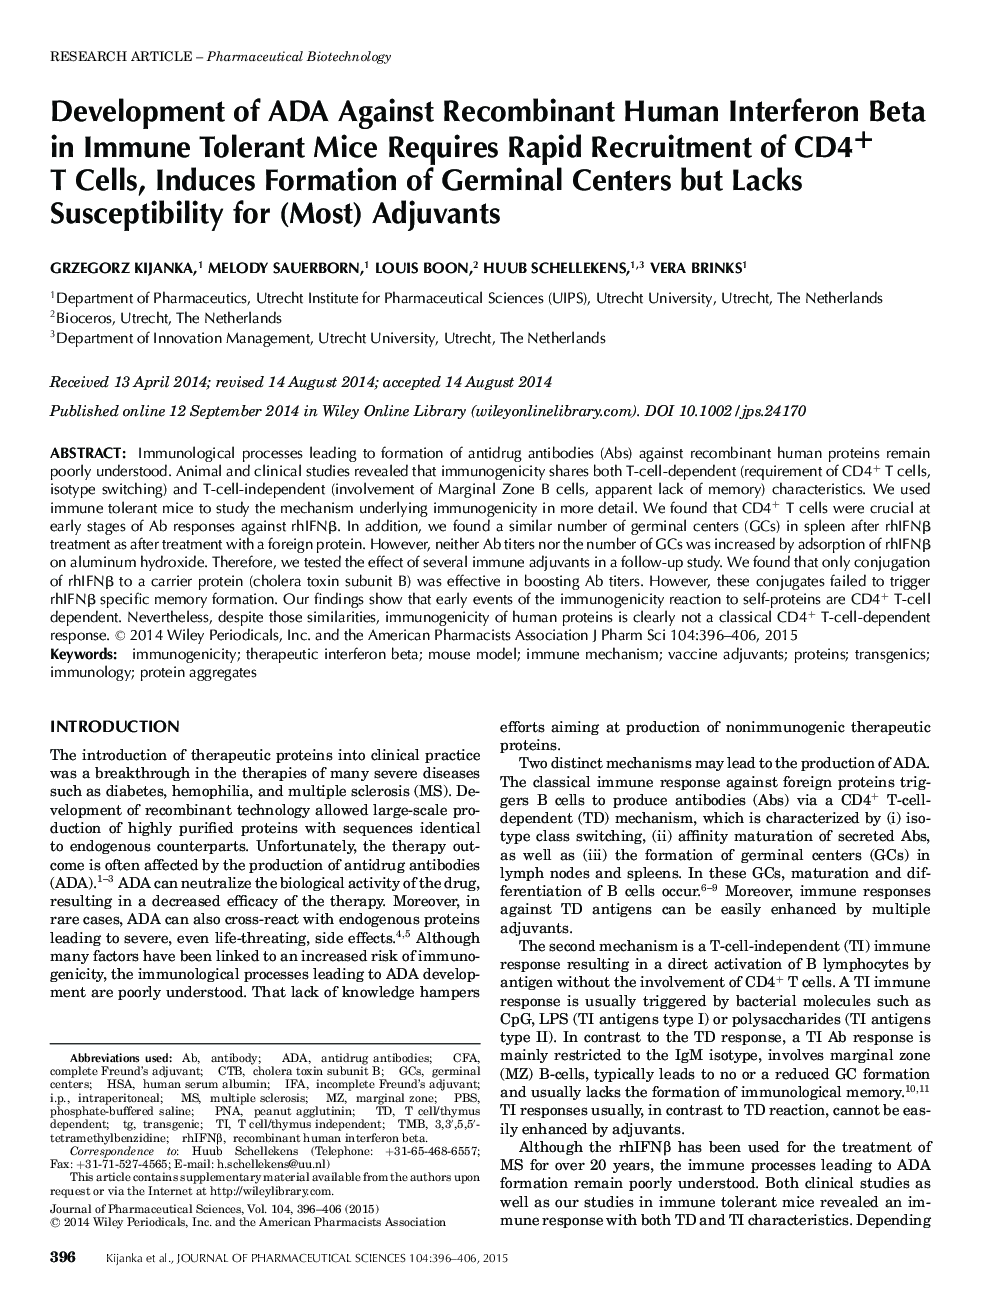 Development of ADA Against Recombinant Human Interferon Beta in Immune Tolerant Mice Requires Rapid Recruitment of CD4+ T Cells, Induces Formation of Germinal Centers but Lacks Susceptibility for (Most) Adjuvants